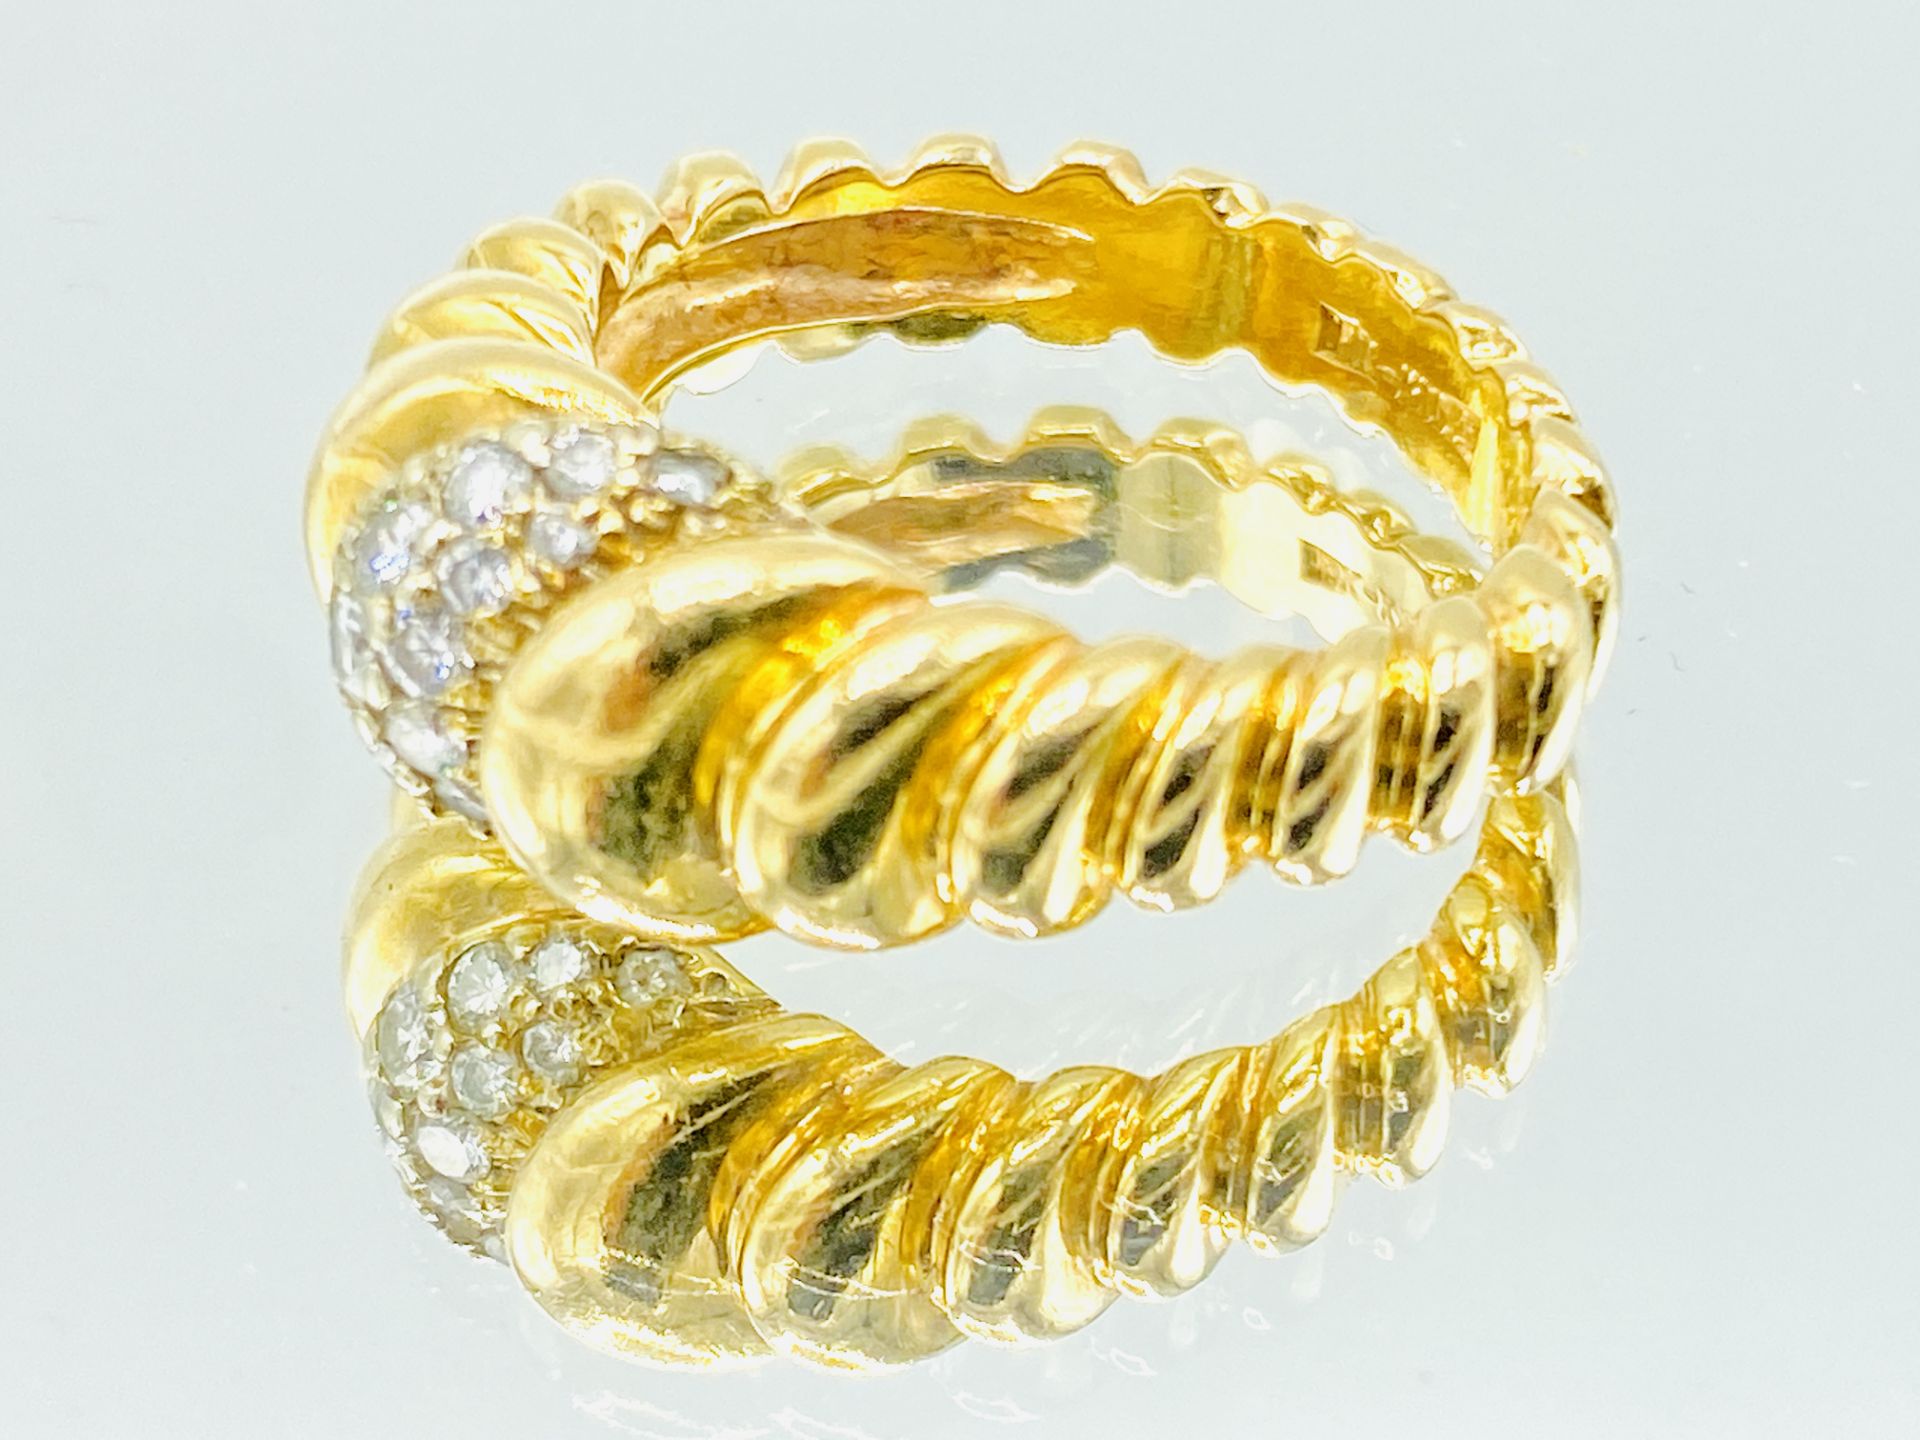 14K gold and diamond ring - Image 4 of 5